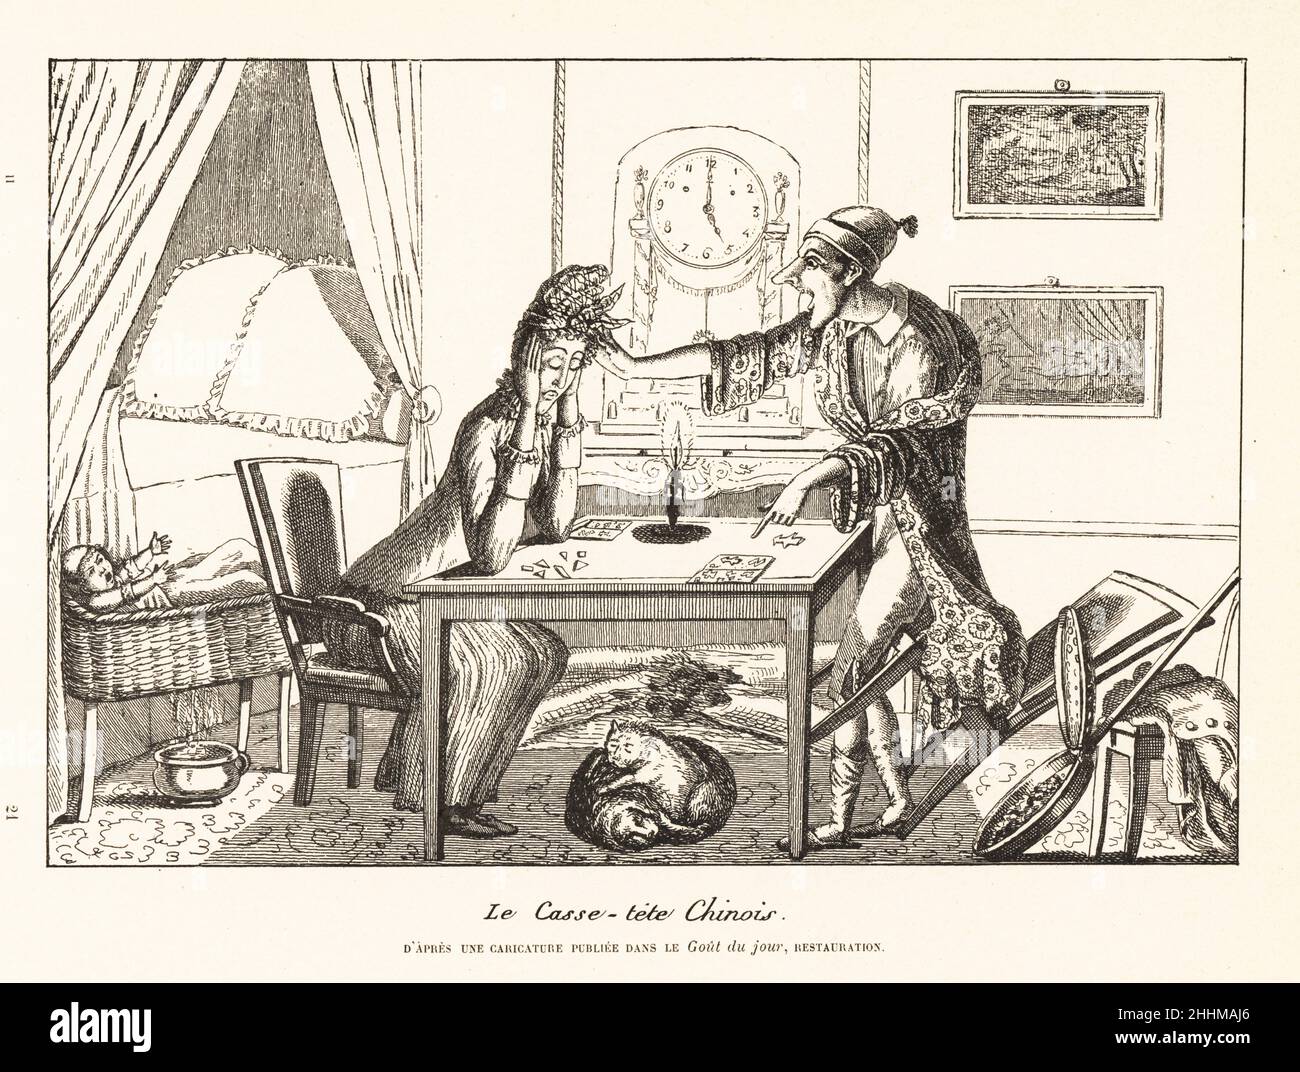 A woman playing a Tangram or Chinese puzzle game, 1818. A husband berates a wife addicted to the gamt, ignoring the baby crying in its cot. The game sparked a craze in the early 19th century. Le casse-tete Chinois. Lithograph from Henry Rene d’Allemagne’s Recreations et Passe-Temps, Games and Pastimes, Hachette, Paris, 1906. Stock Photo